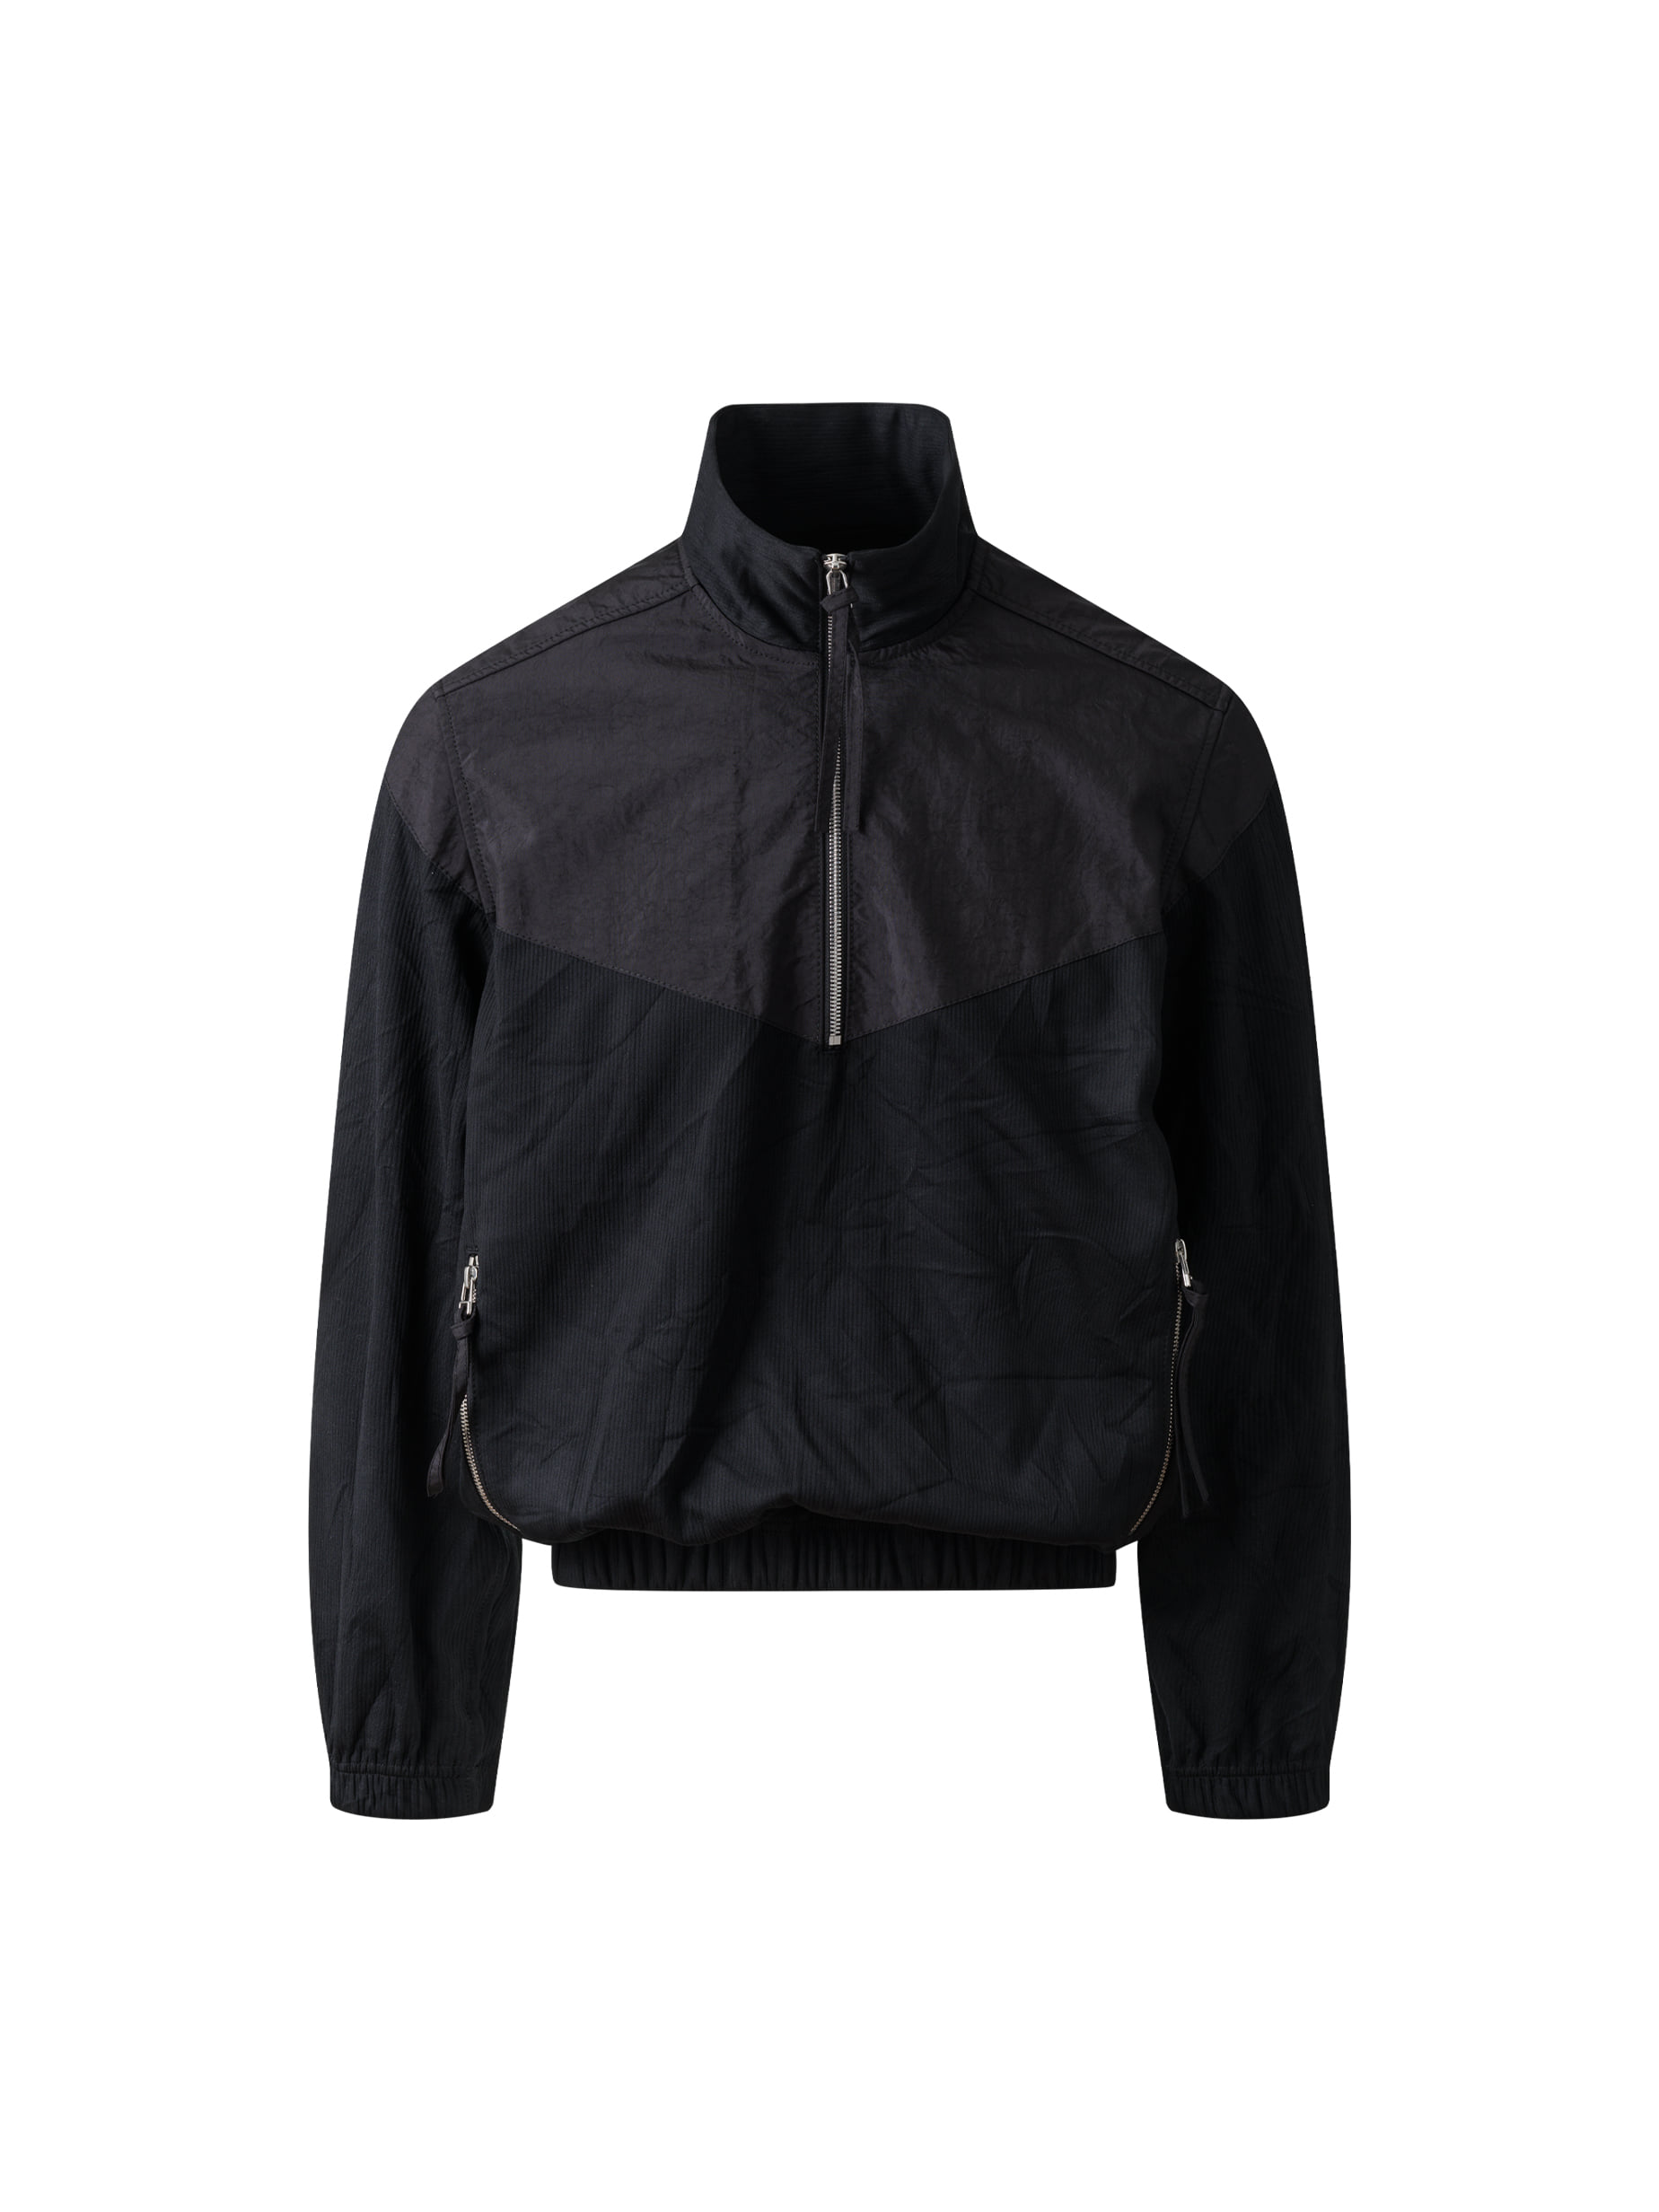 WGS AIRBAG PATCHED JERSEY HALF ZIP JUMPER BLACK